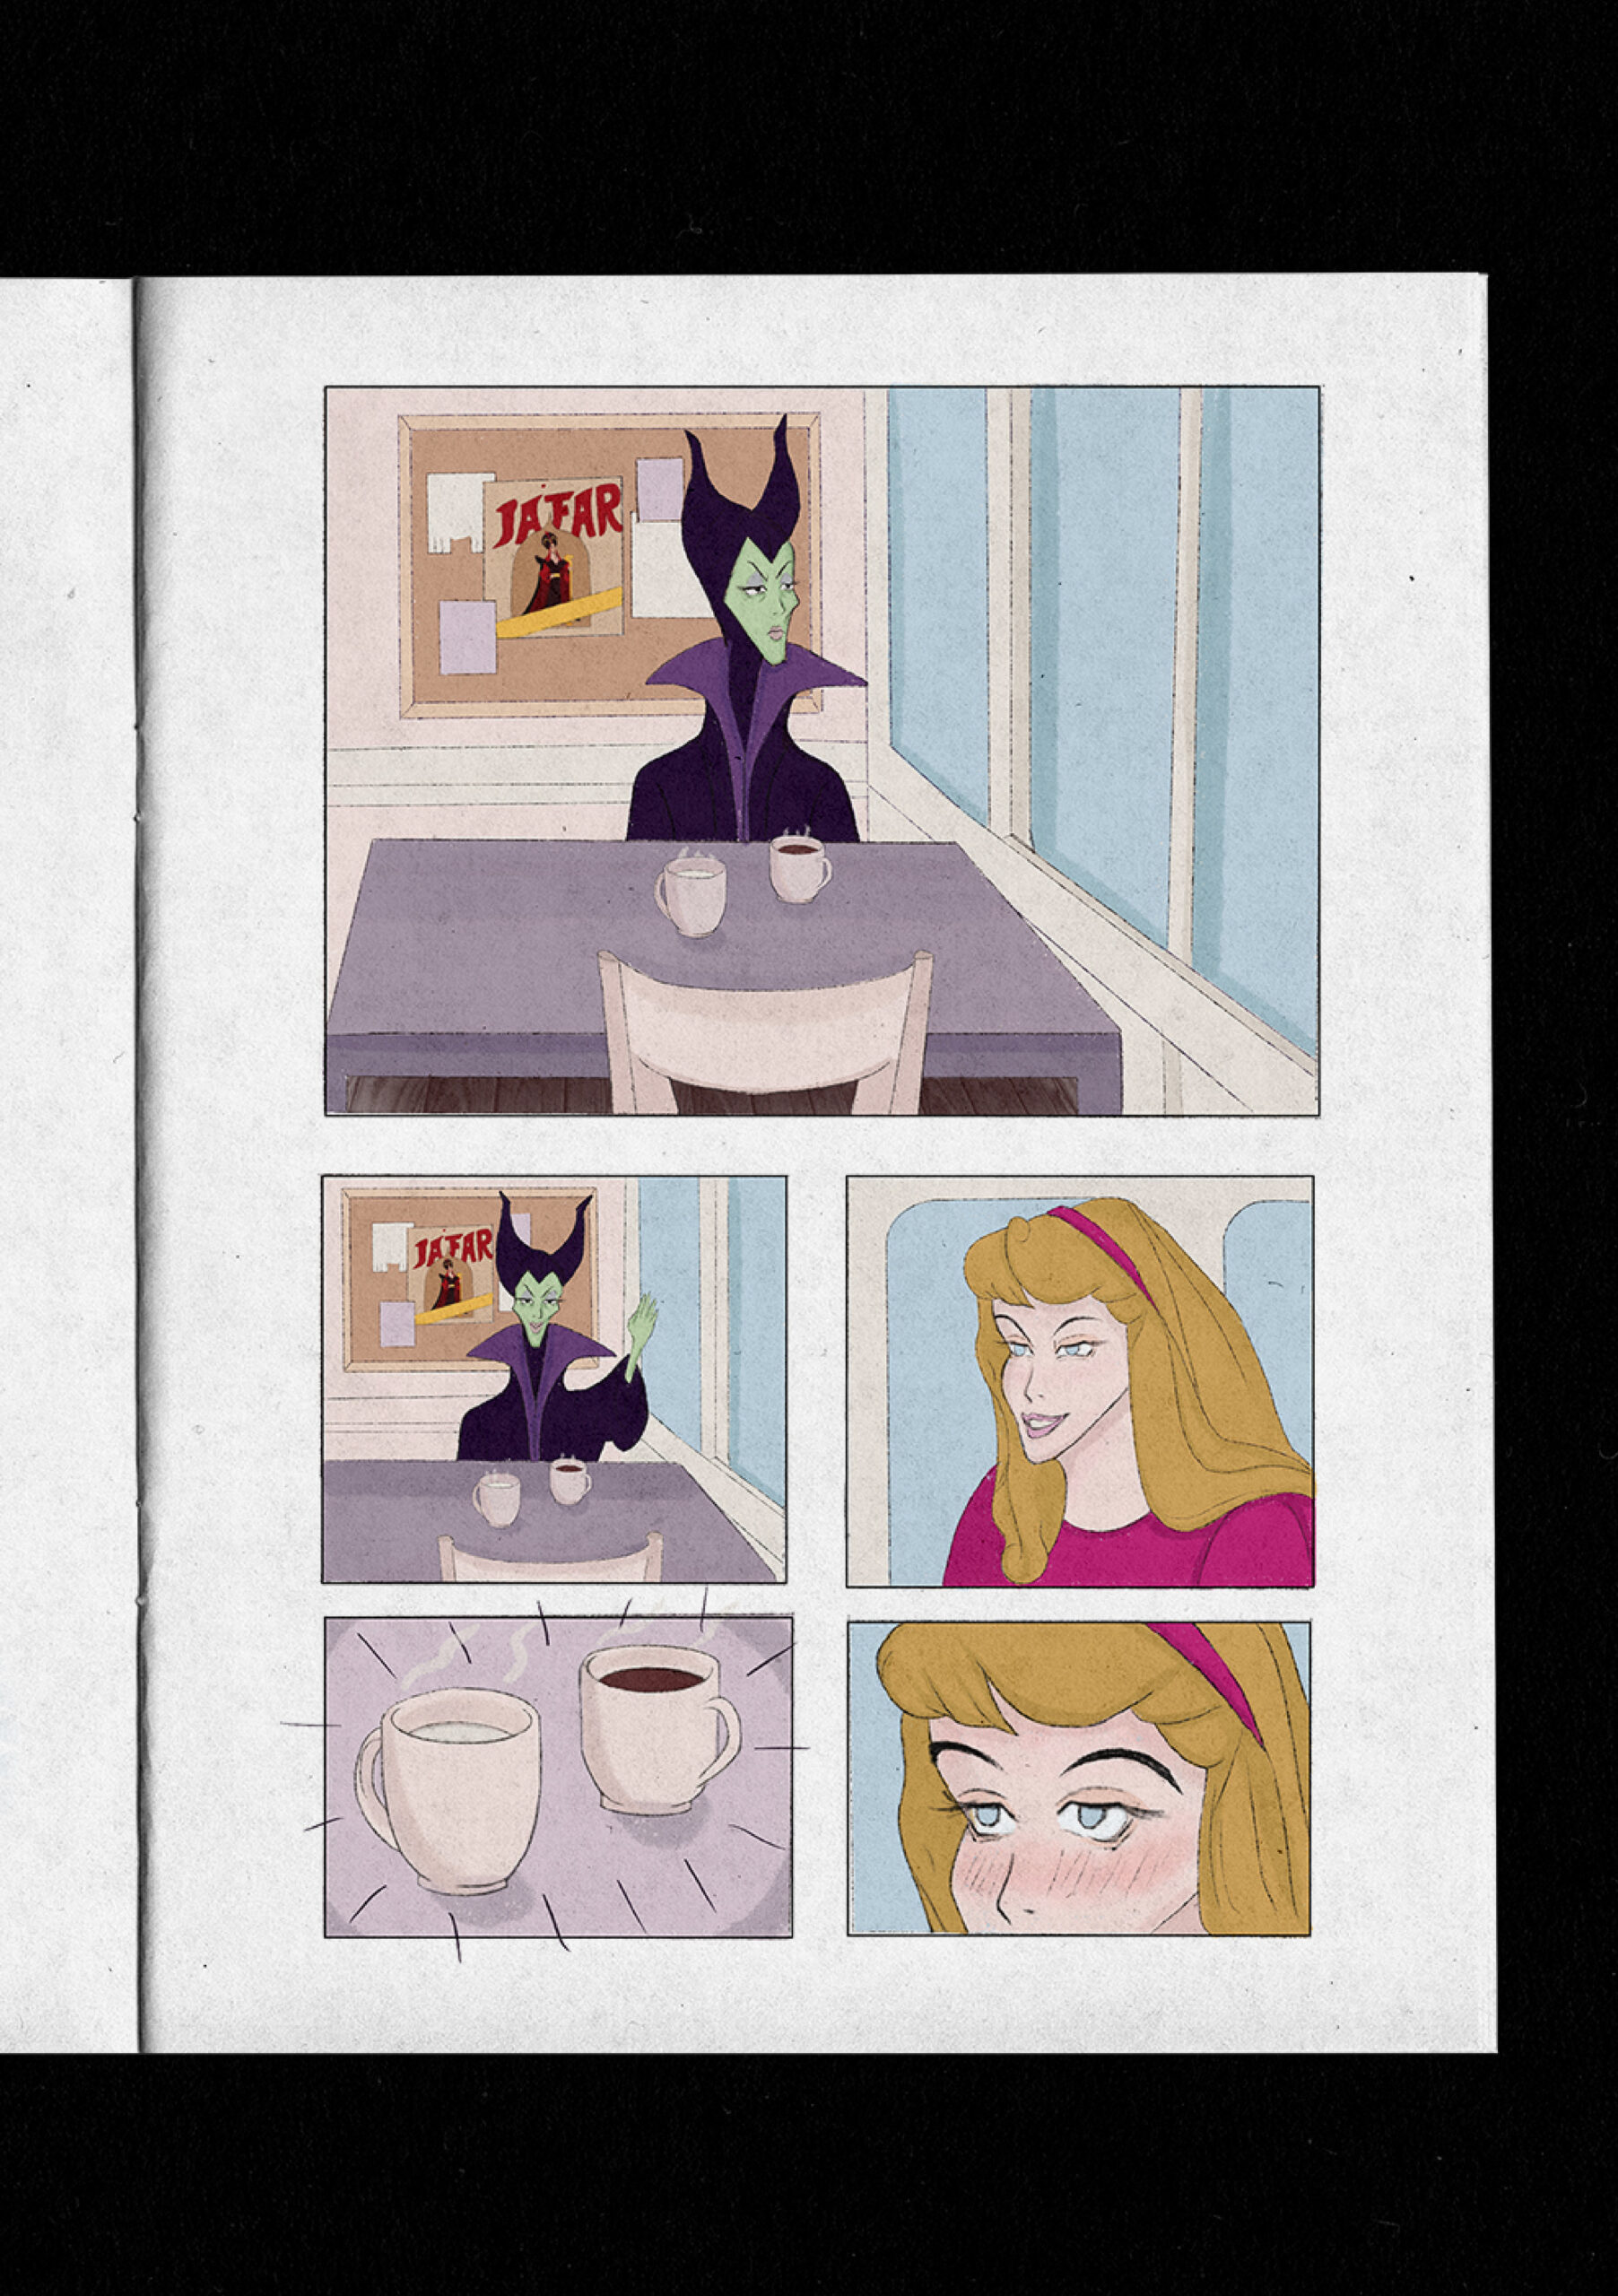 Part of another short comic, surrounding Maleficent